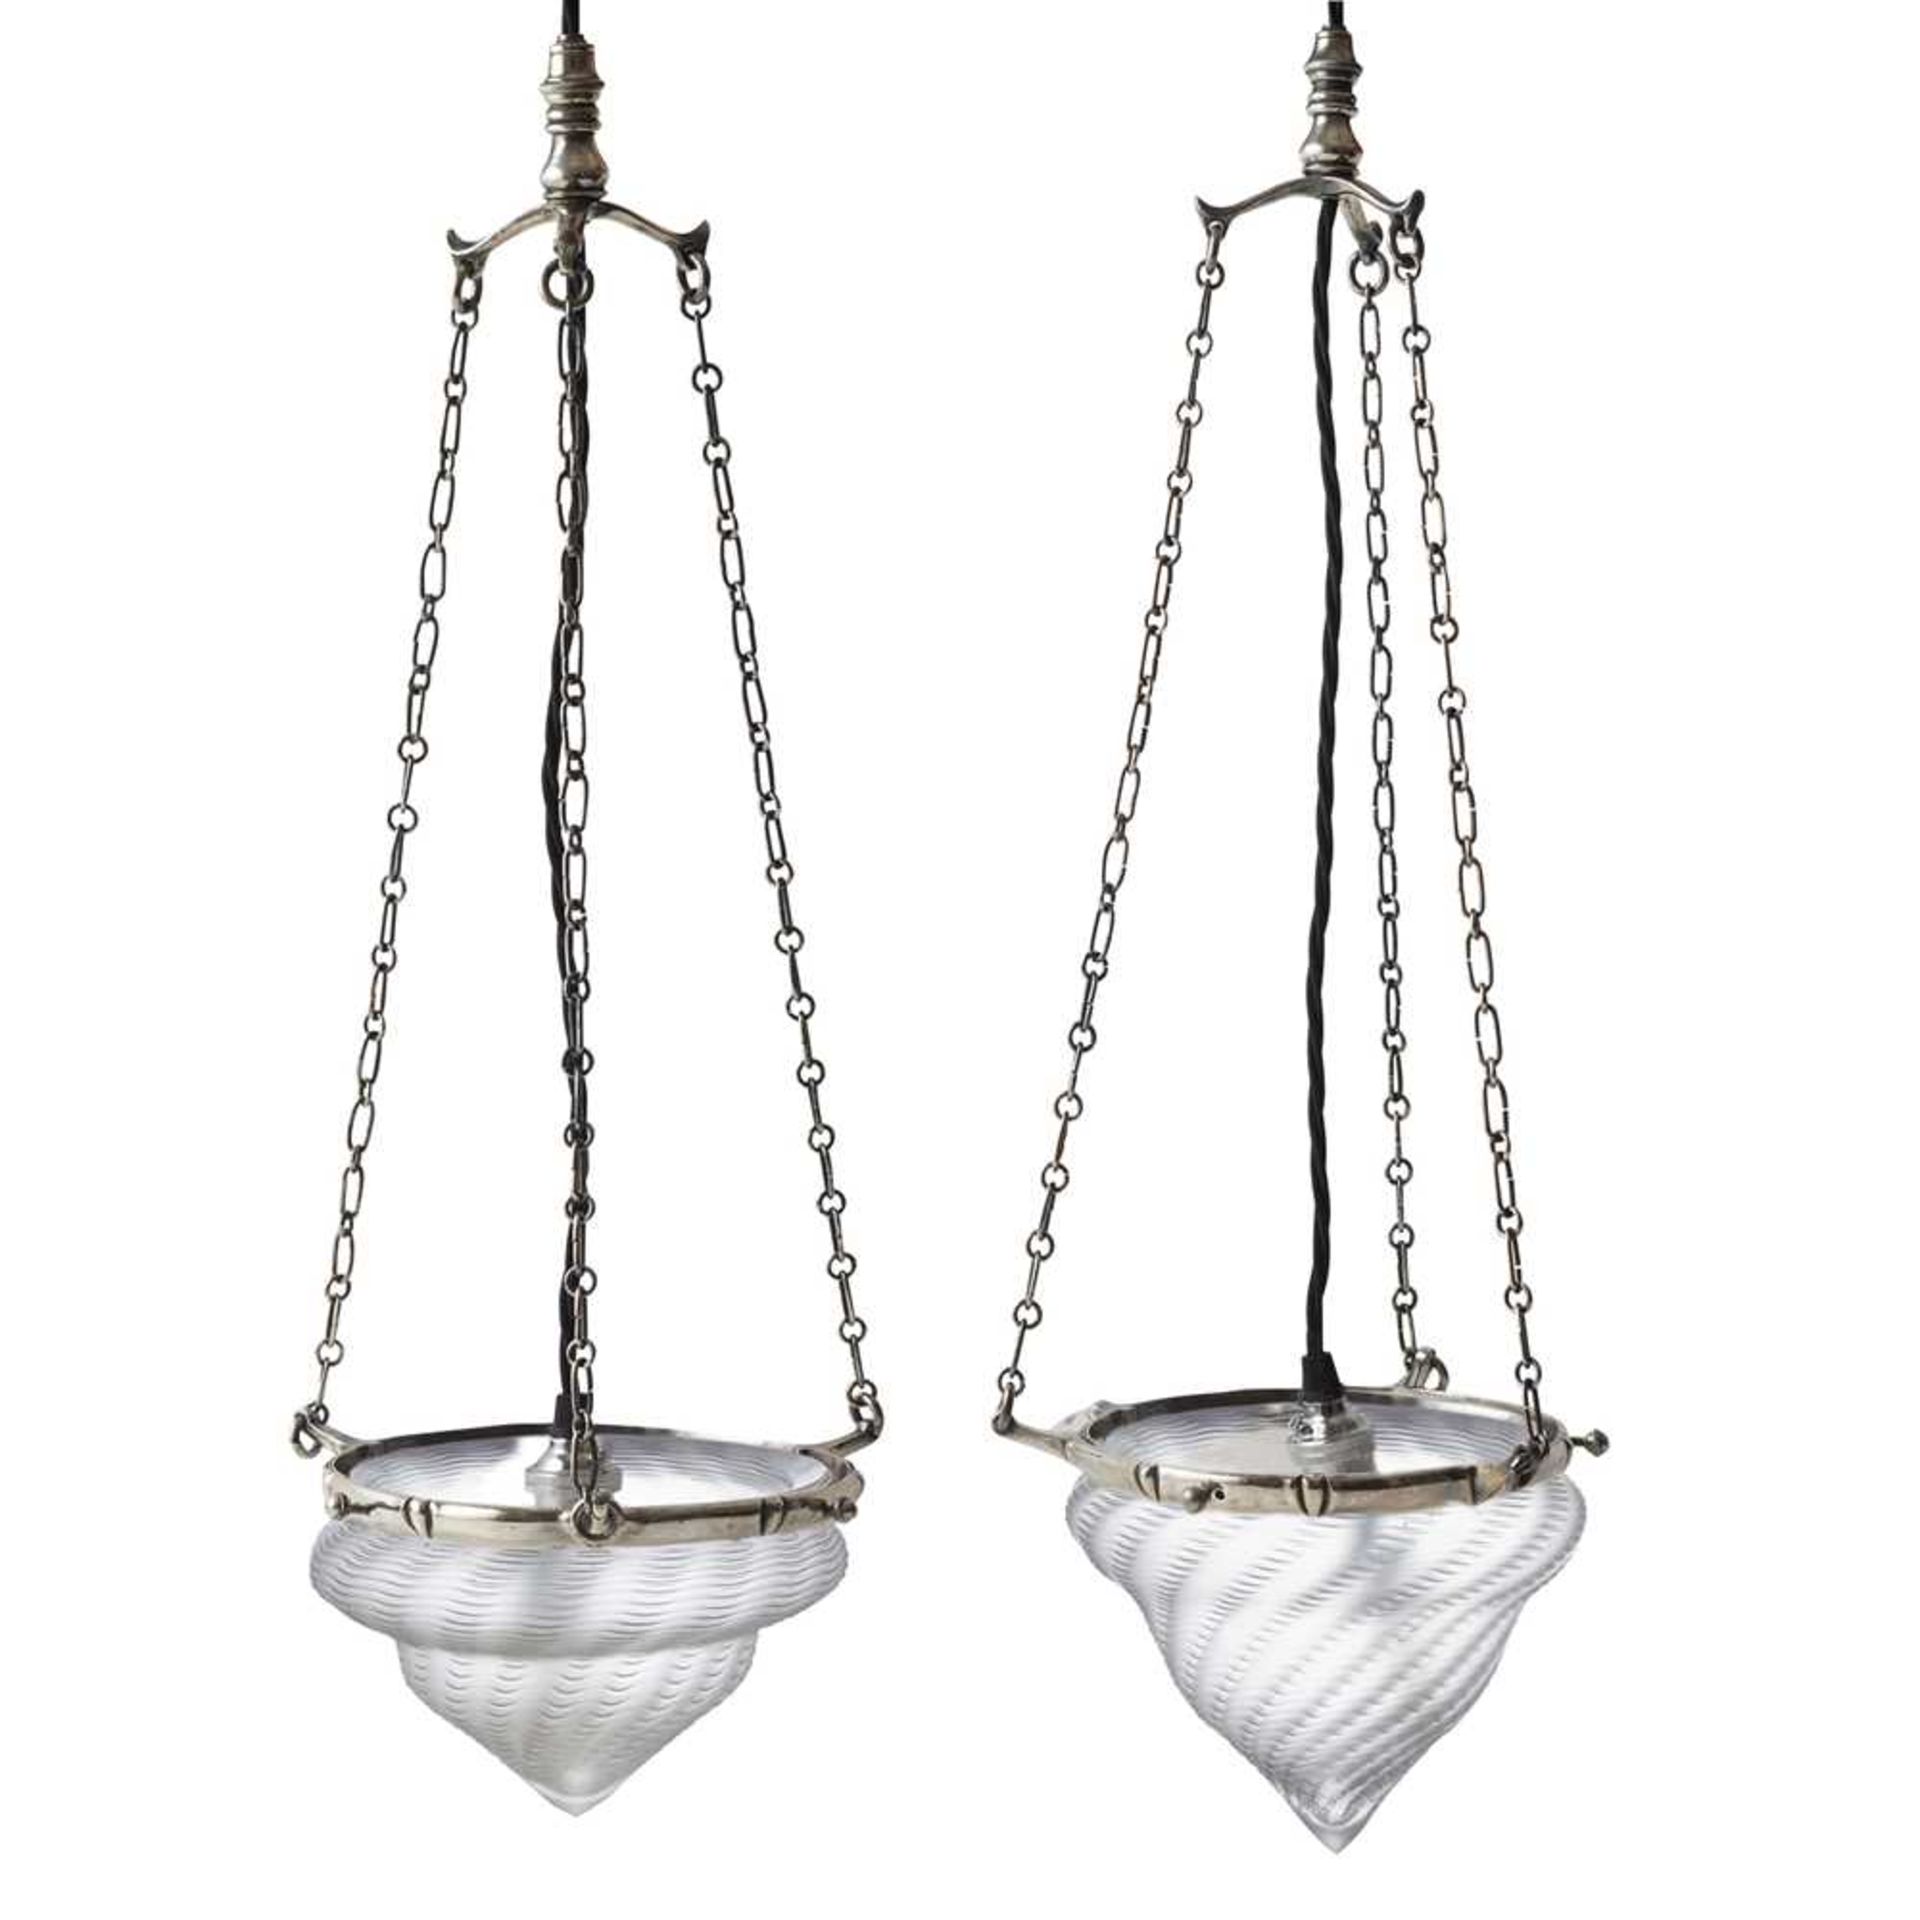 W.A.S. BENSON (1854-1924) AND JAMES POWELL & SONS PAIR OF ARTS & CRAFTS PENDANT LIGHTS, CIRCA 1900